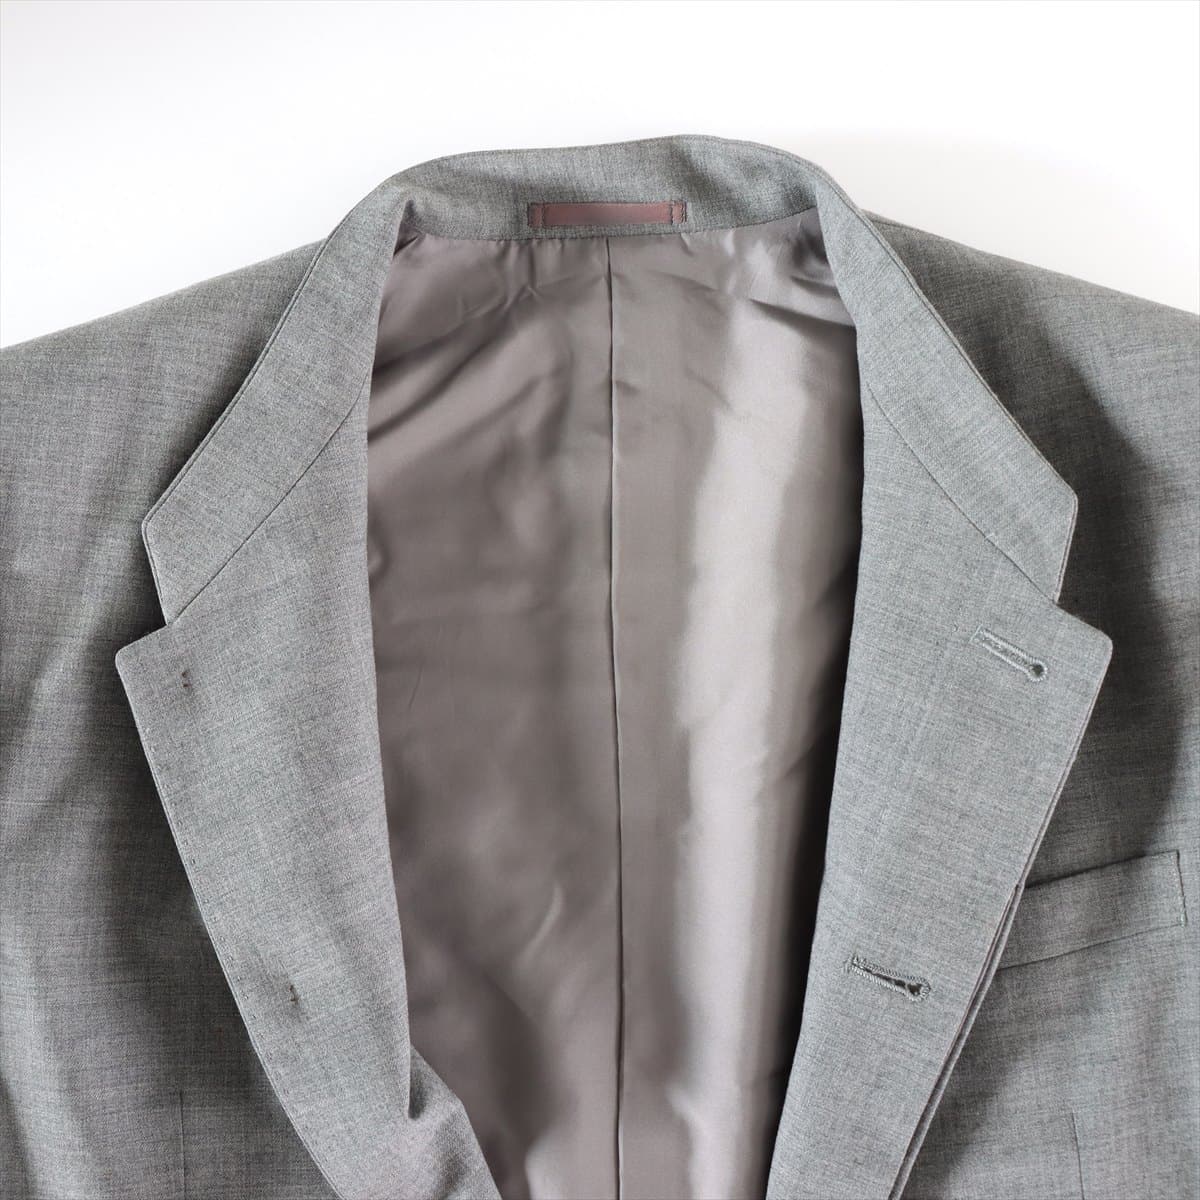 Issey Miyake  Hair Suit jacket 8 Men's Grey  Mao color Comes with shoulder pads